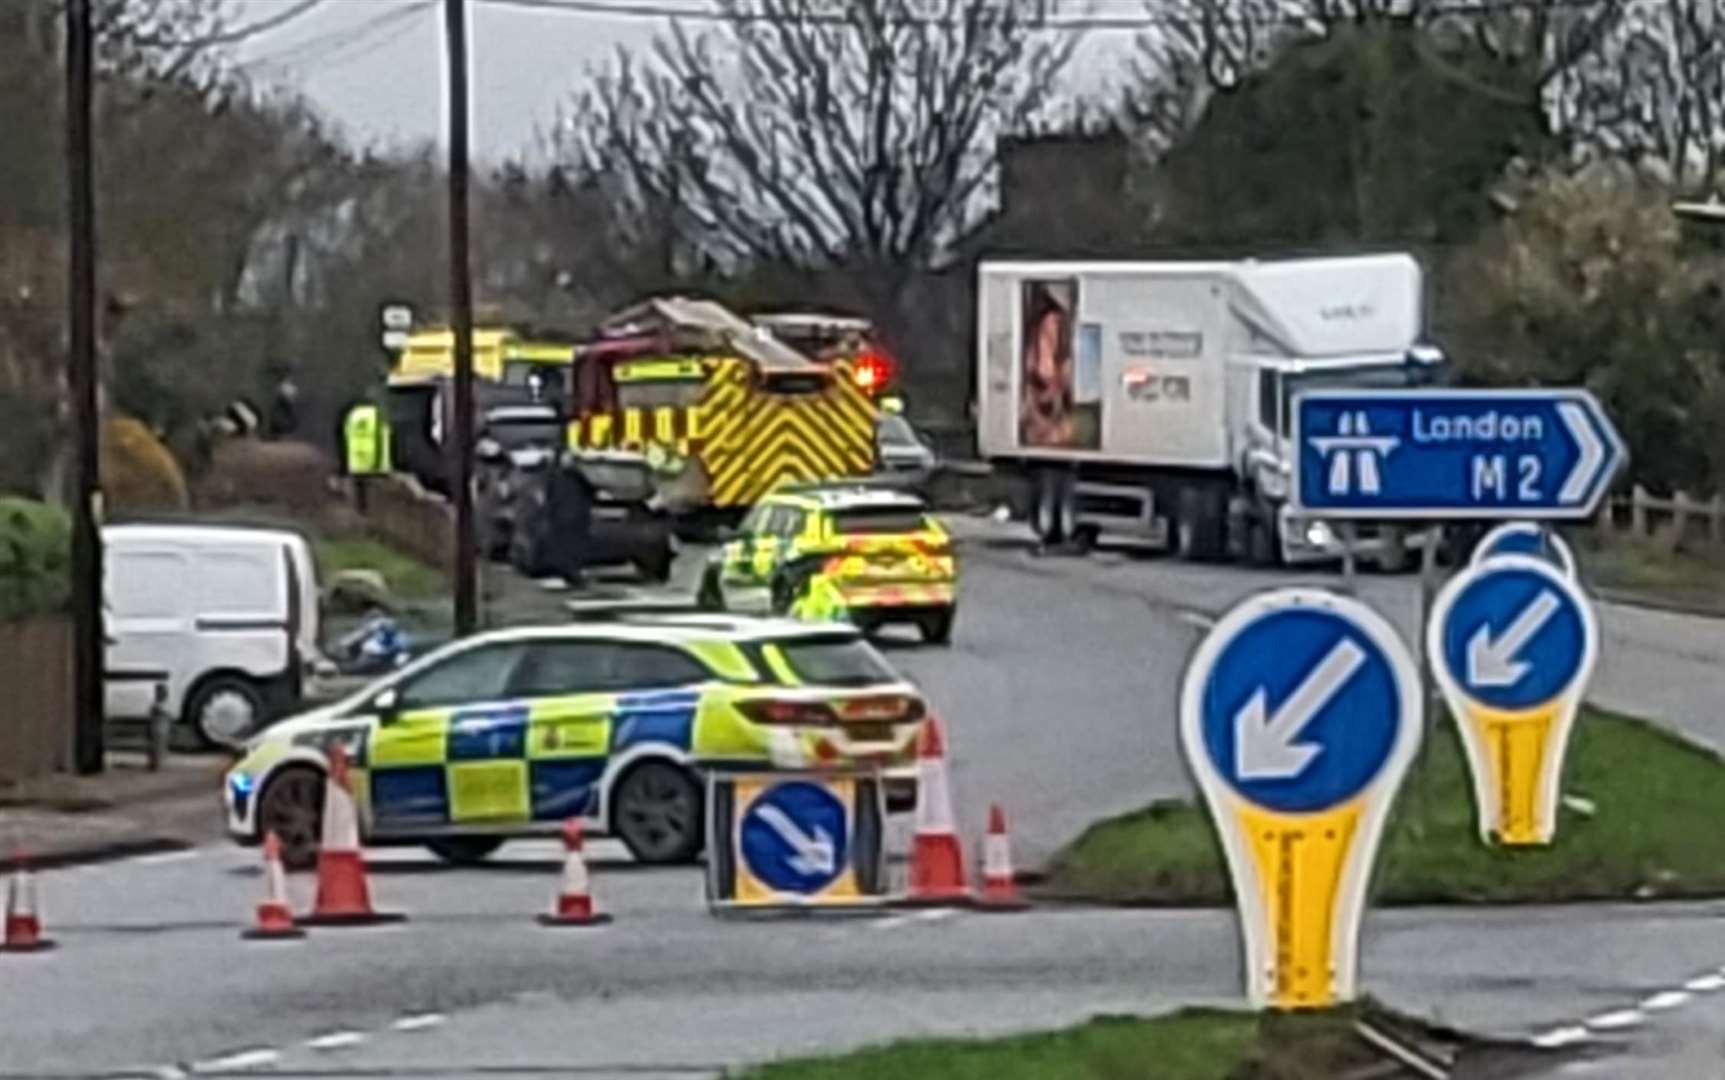 The A251 in Faversham is blocked by the M2 junction following a crash